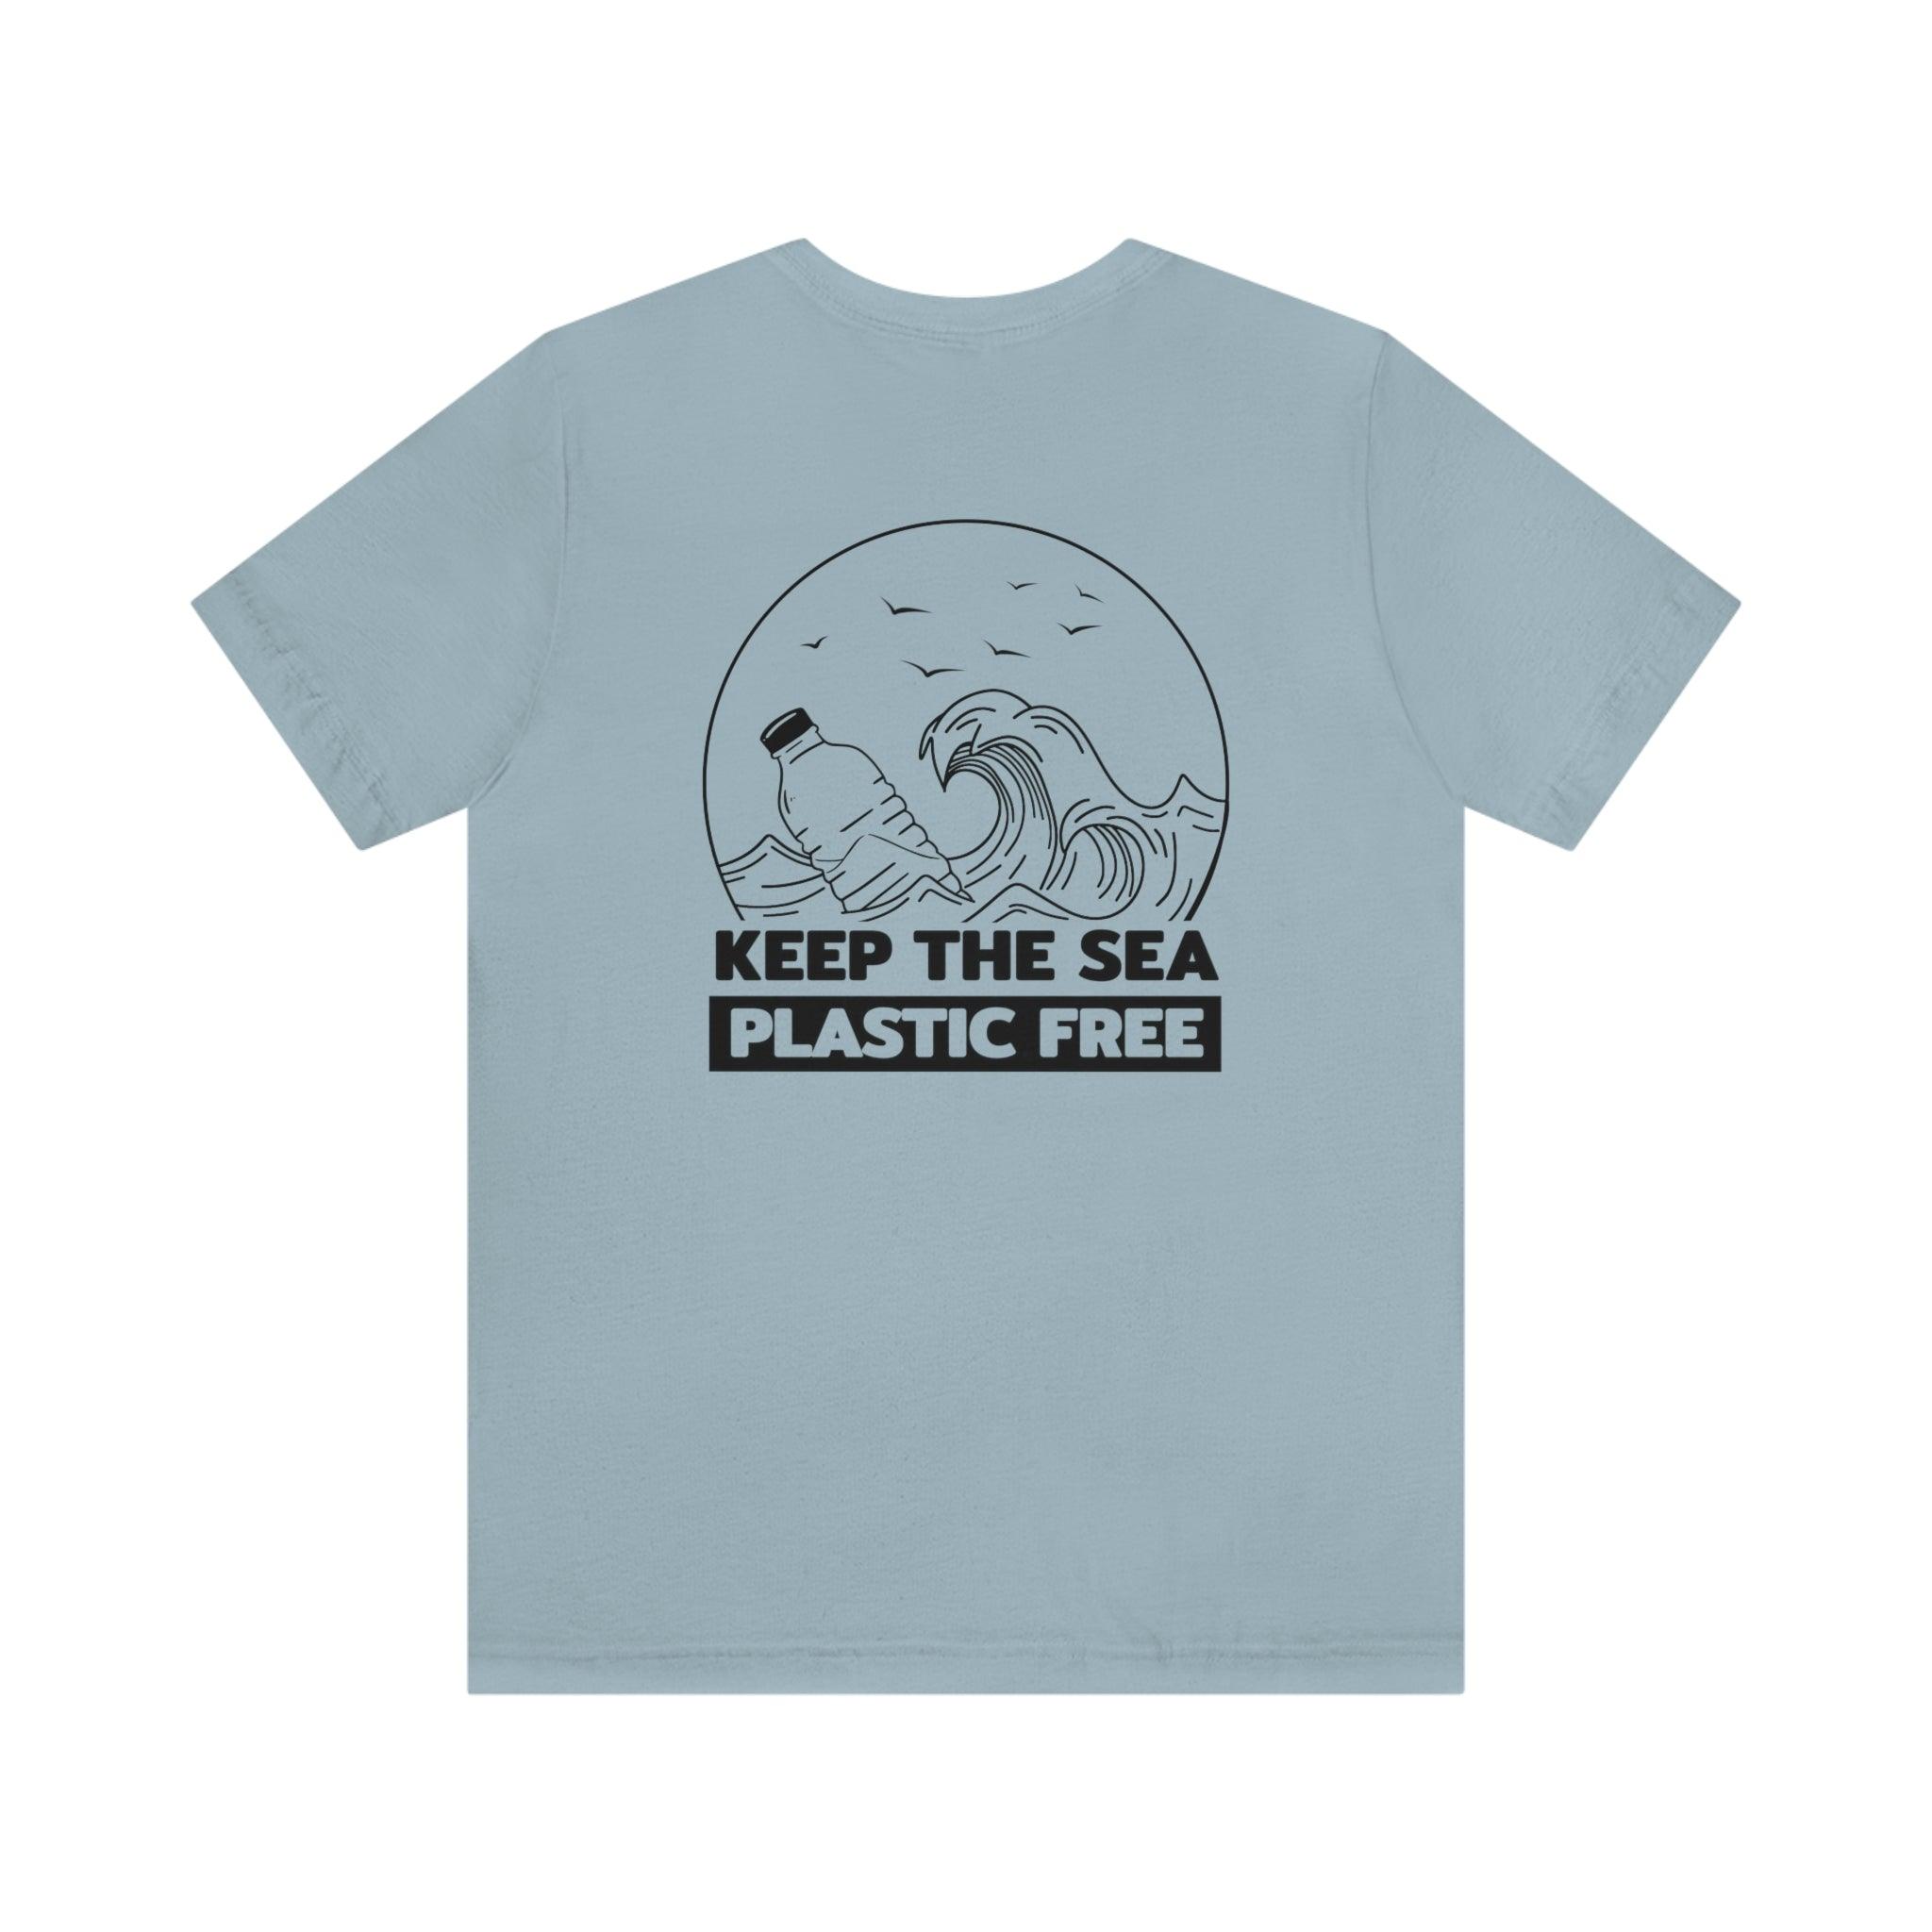 Melomys "Keep The Seas Plastic Free" 100% Cotton Jersey Short Sleeve T-Shirt - Melomys